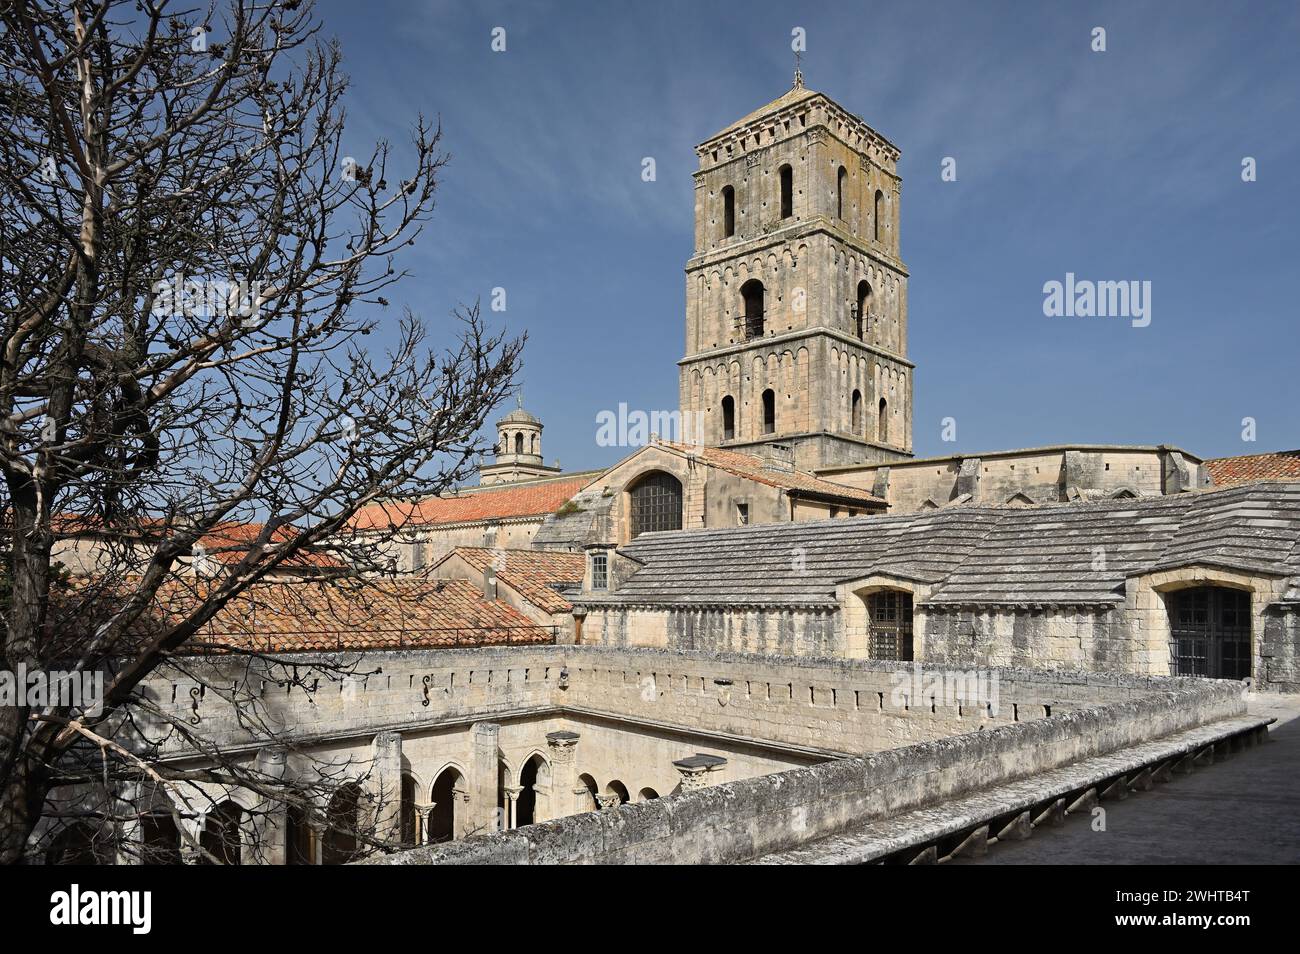 Saint-Trophime cloister and the bell tower of Saint-Trophime Cathedral in Arles, Provence, France Stock Photo